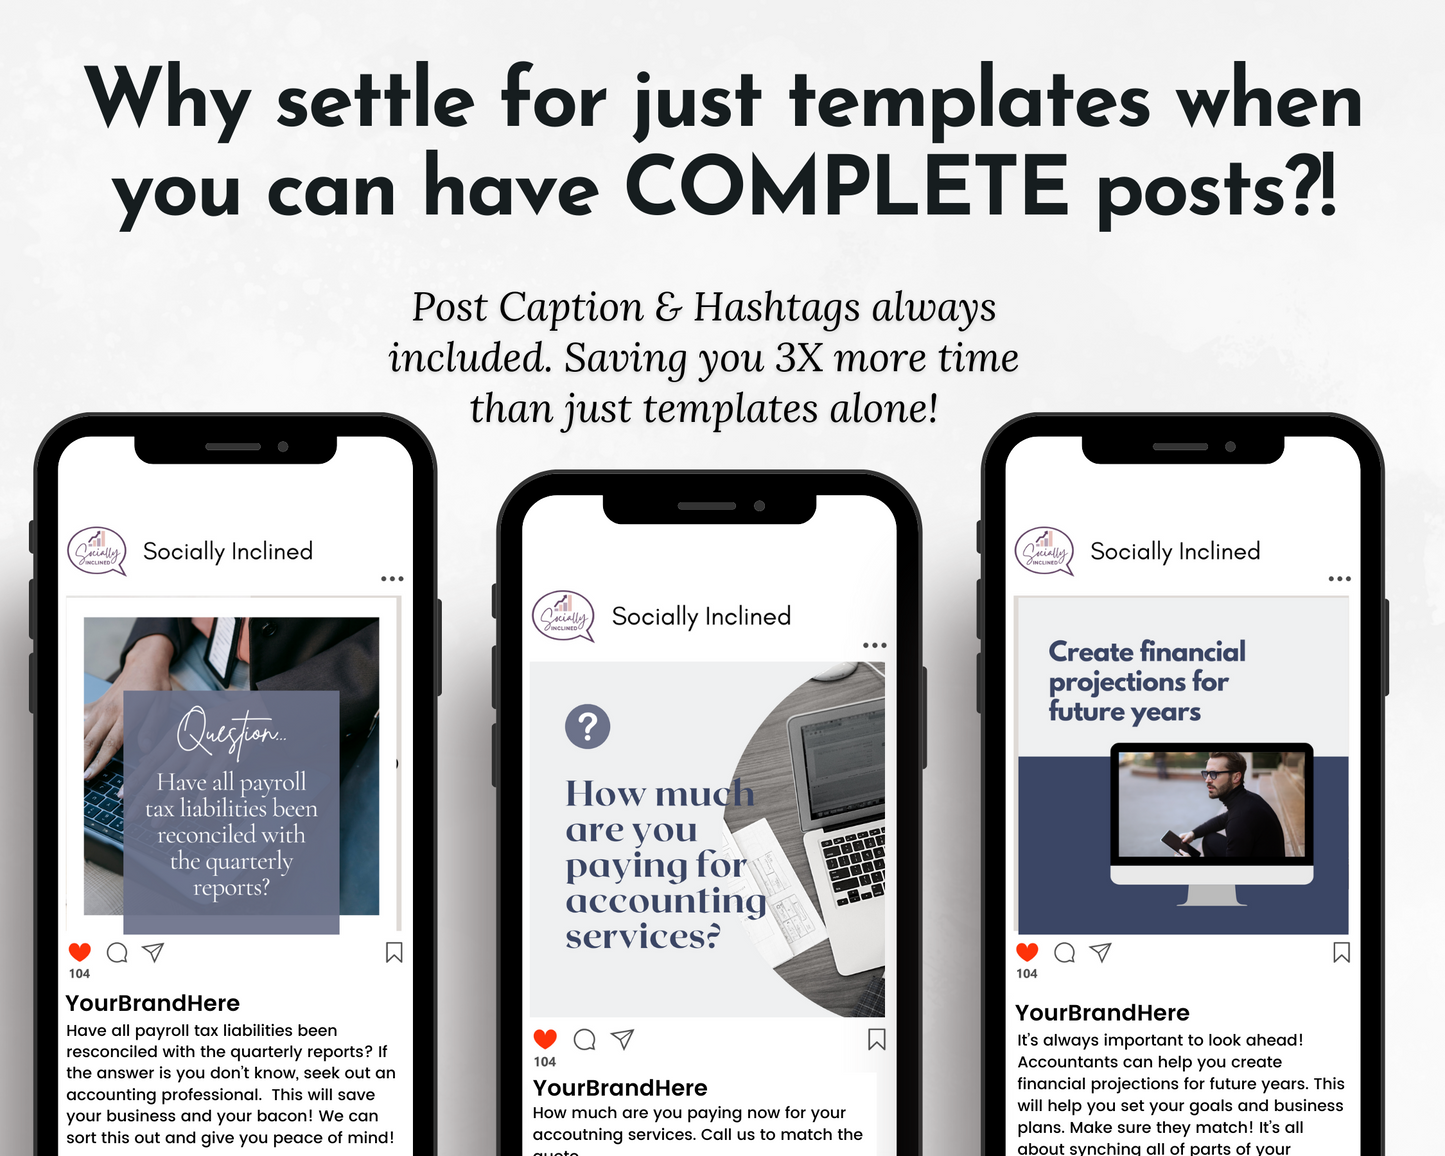 Four Accounting Social Media Post Bundles with Canva Templates from Socially Inclined, with the text why settle for just templates when you can complete post? The keywords that fit the description are "content" and "social media".